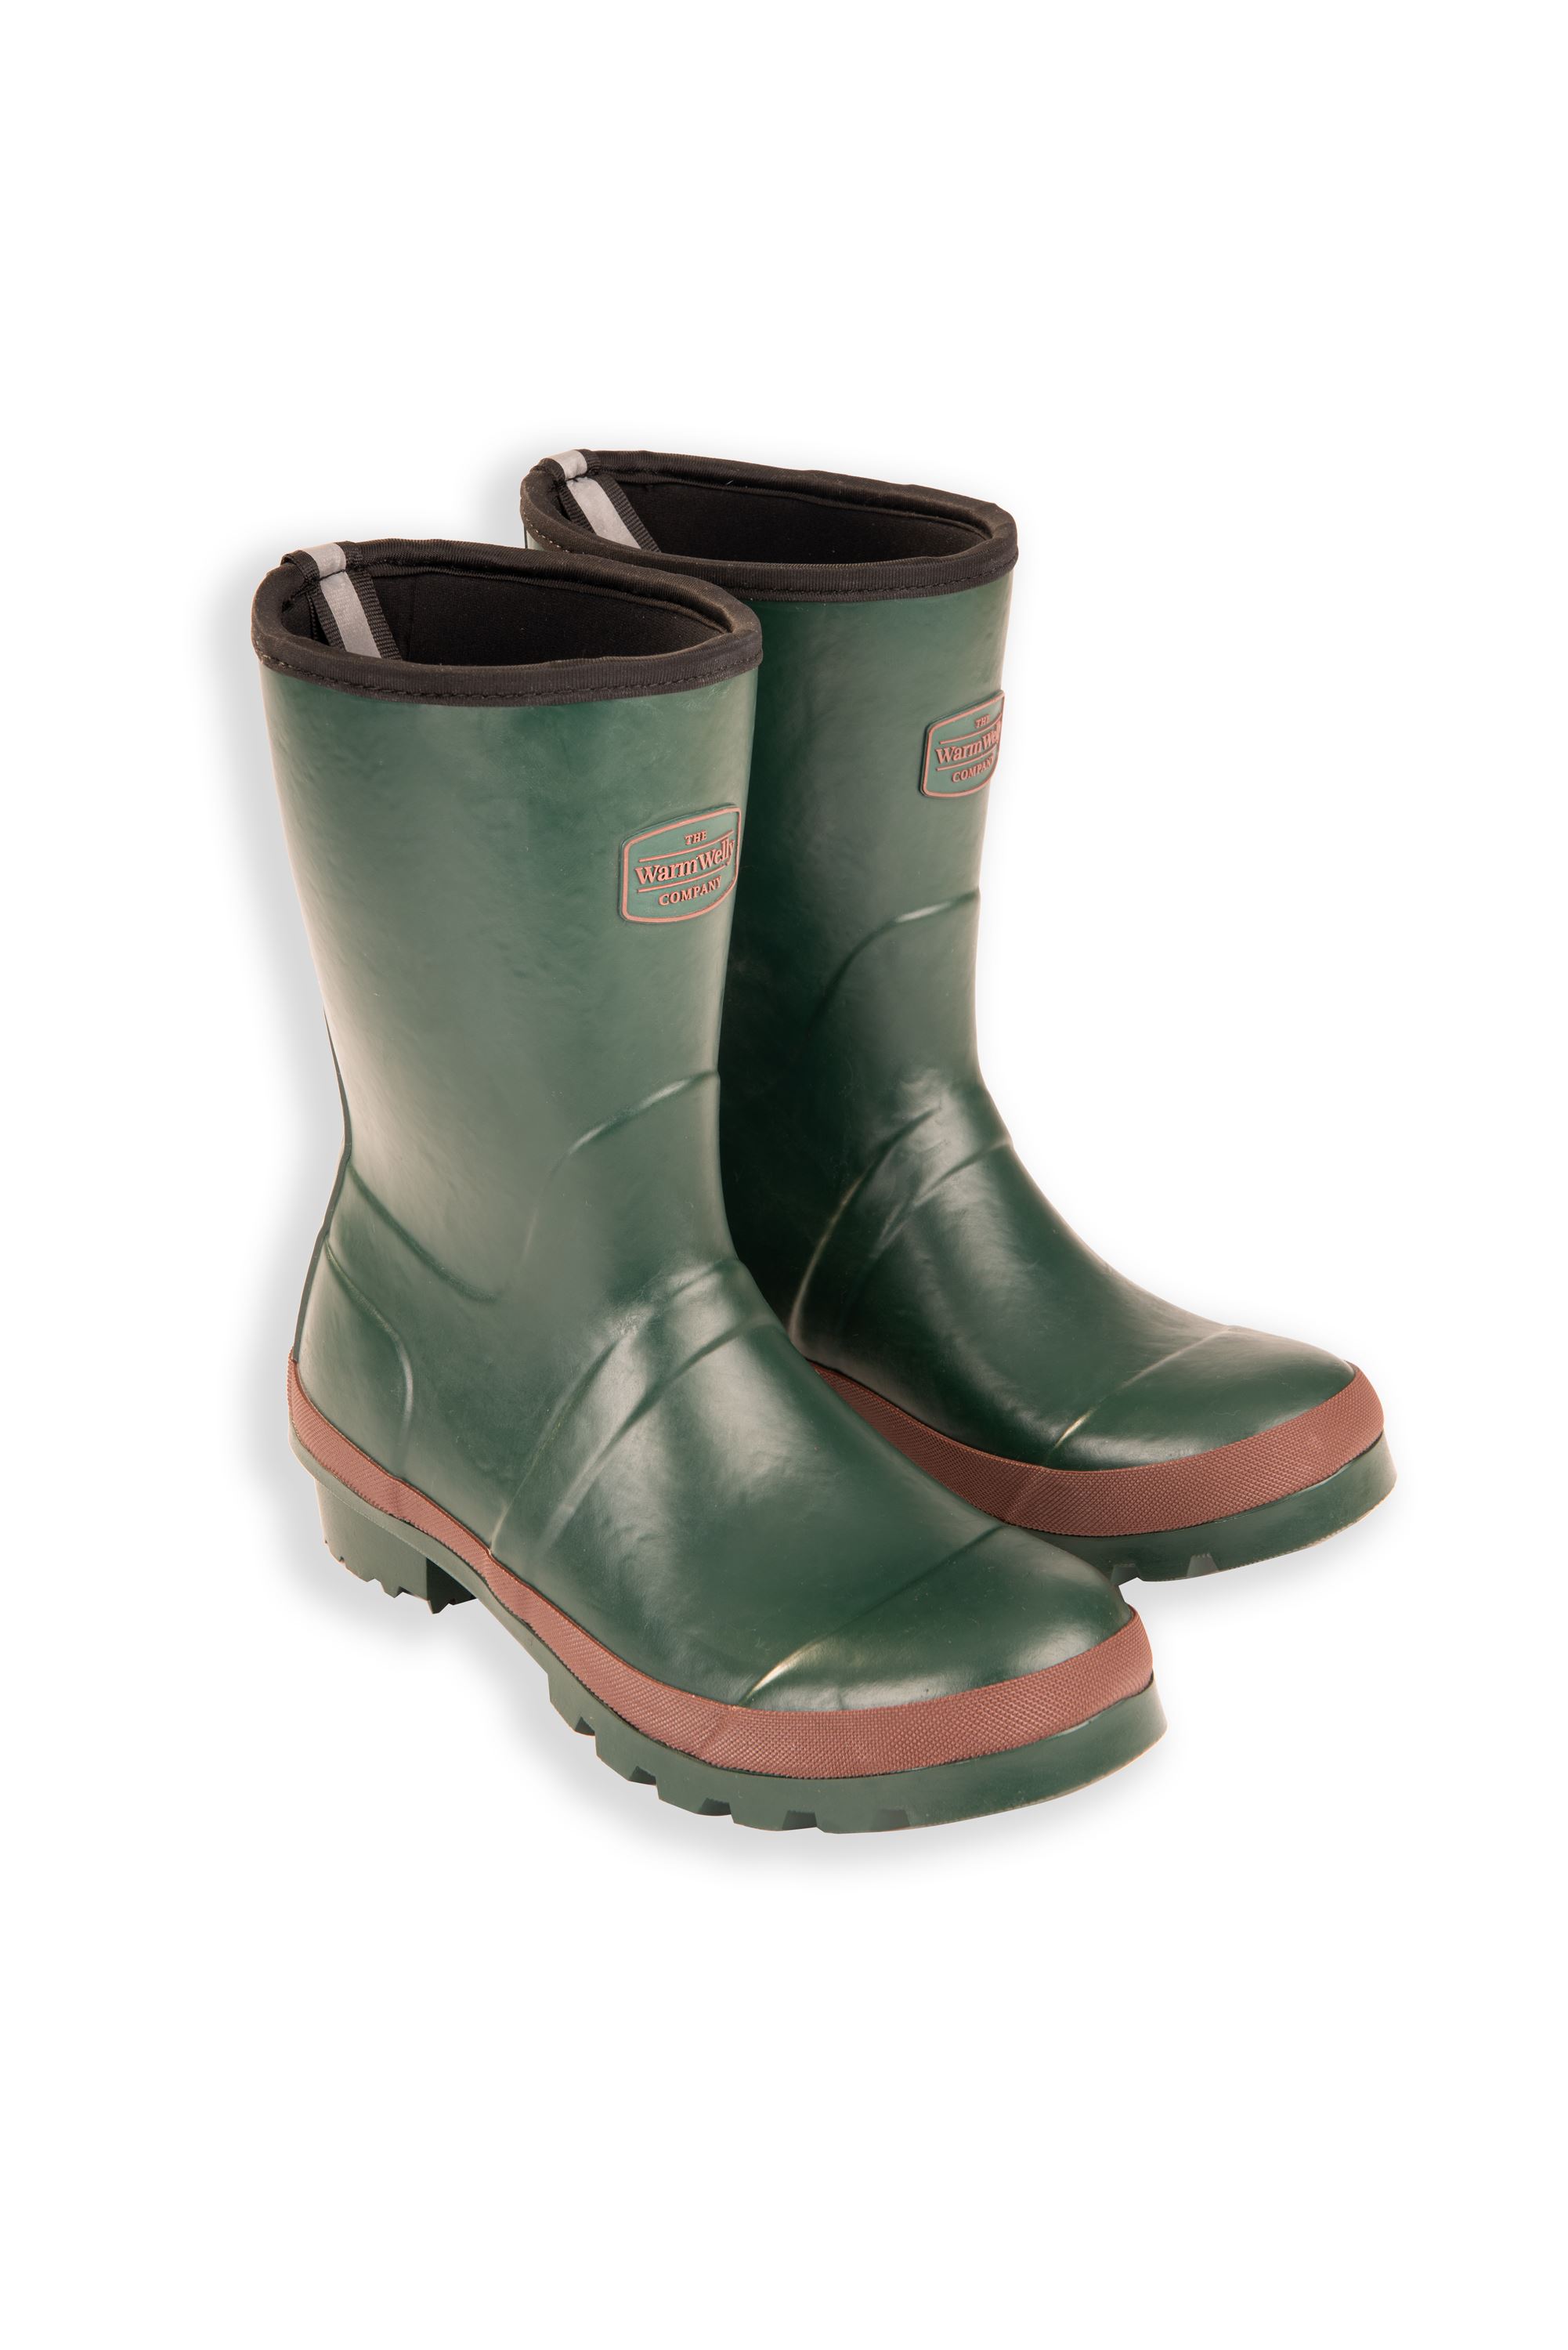 Green Adult Short Warm Wellies | The Warm Welly Company